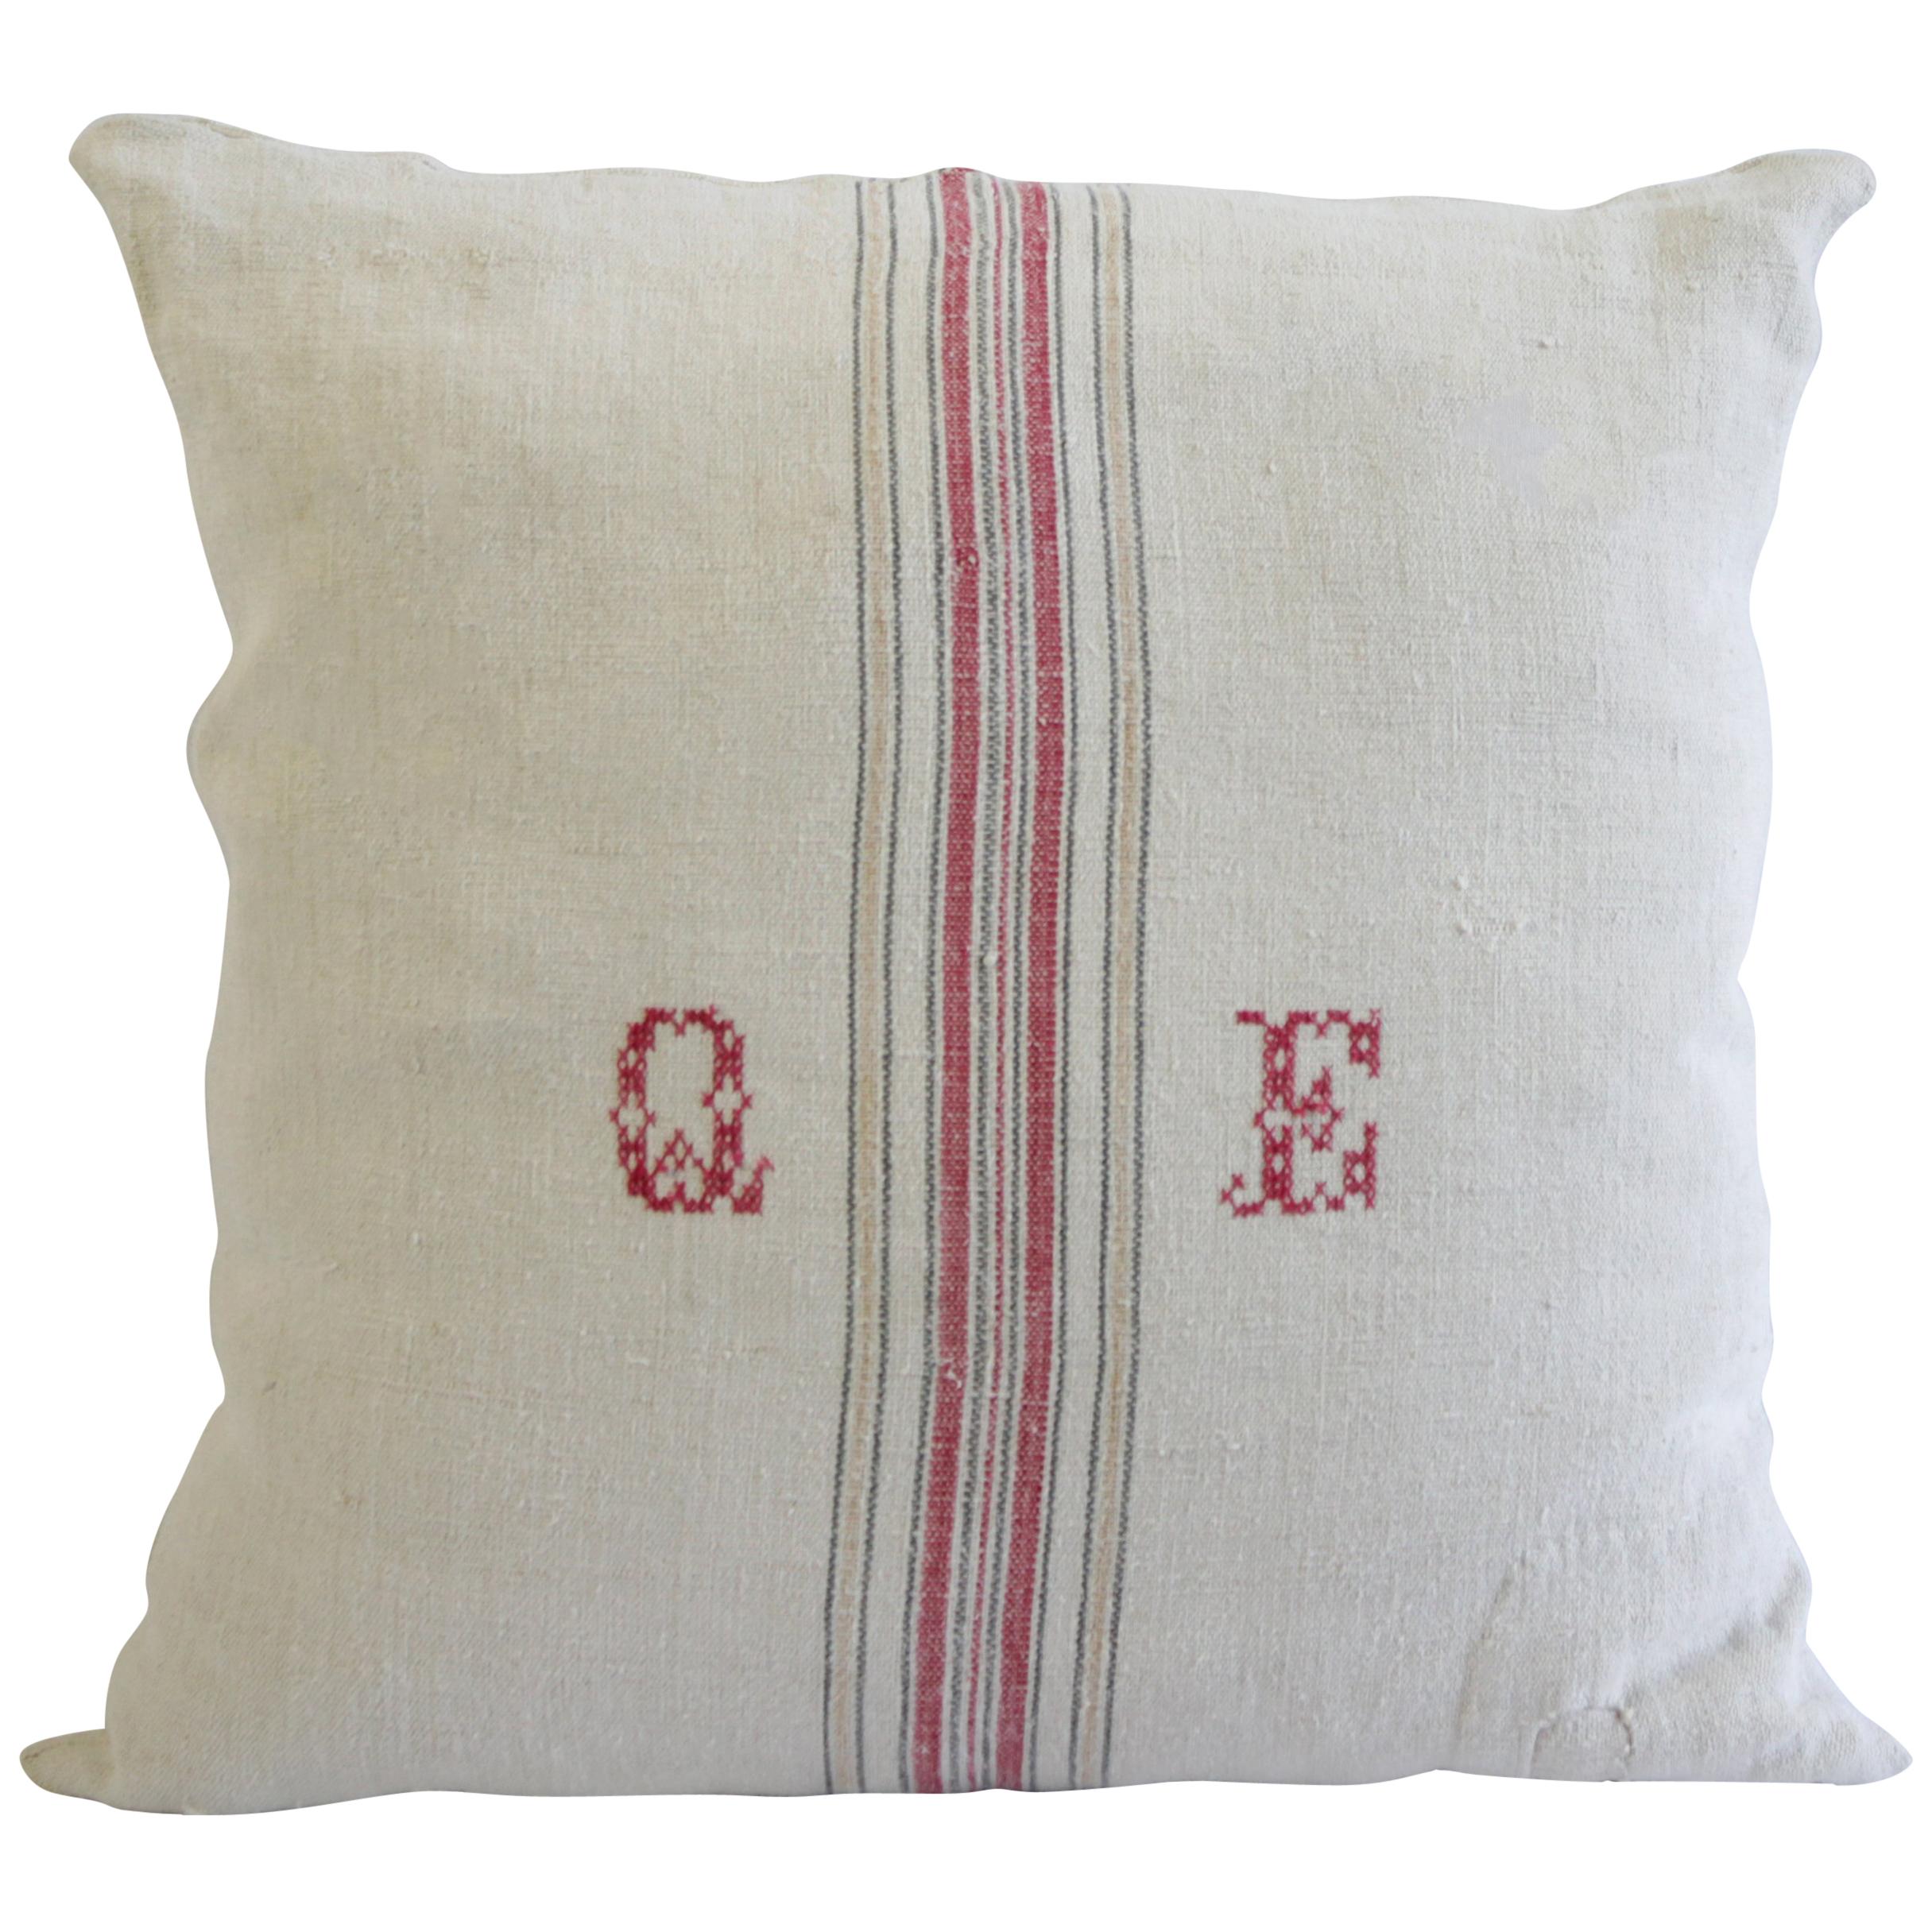 Antique Nubby 19th Century European Red and Tan Stripe with a Monogram Pillow